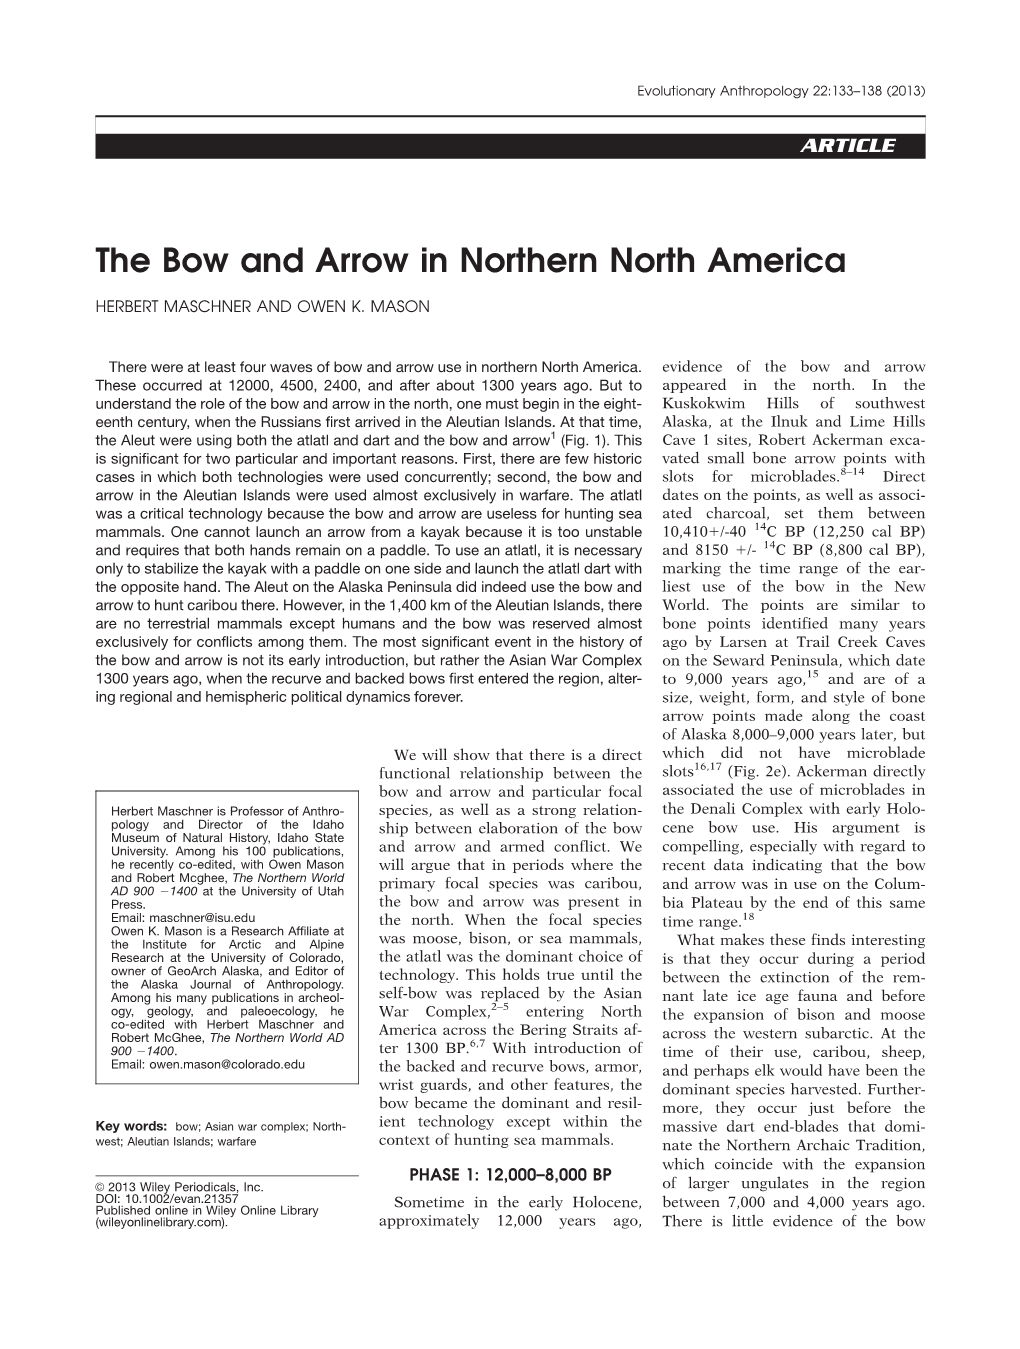 The Bow and Arrow in Northern North America